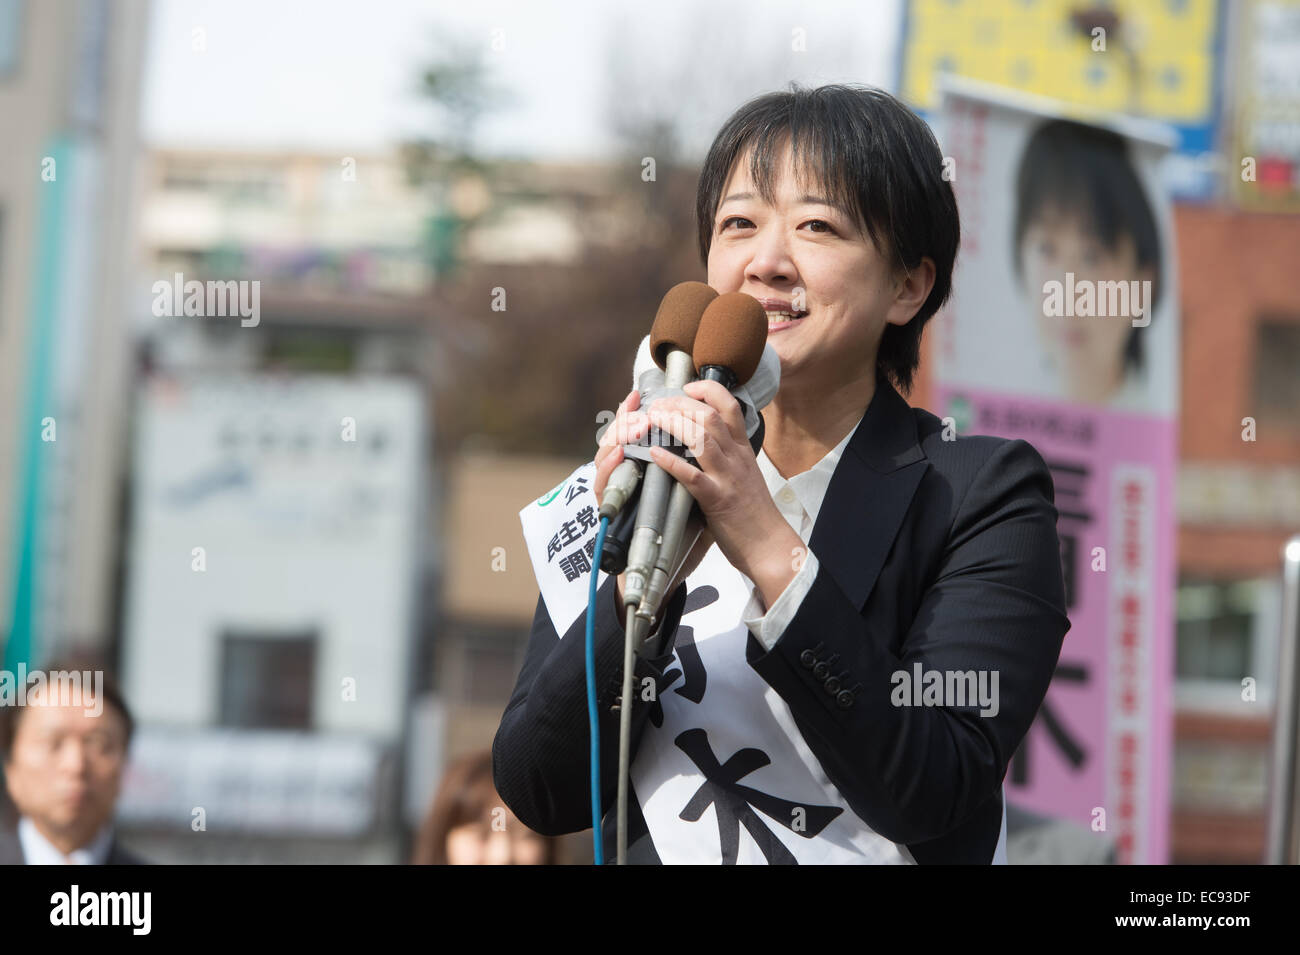 Tokyo, Japan. 10th Dec, 2014. Ai Aoki, a candidate of the People's Life Party, delivers a speech during a campaign for the December 14 lower house election in Tokyo on December 10, 2014. © AFLO/Alamy Live News Stock Photo